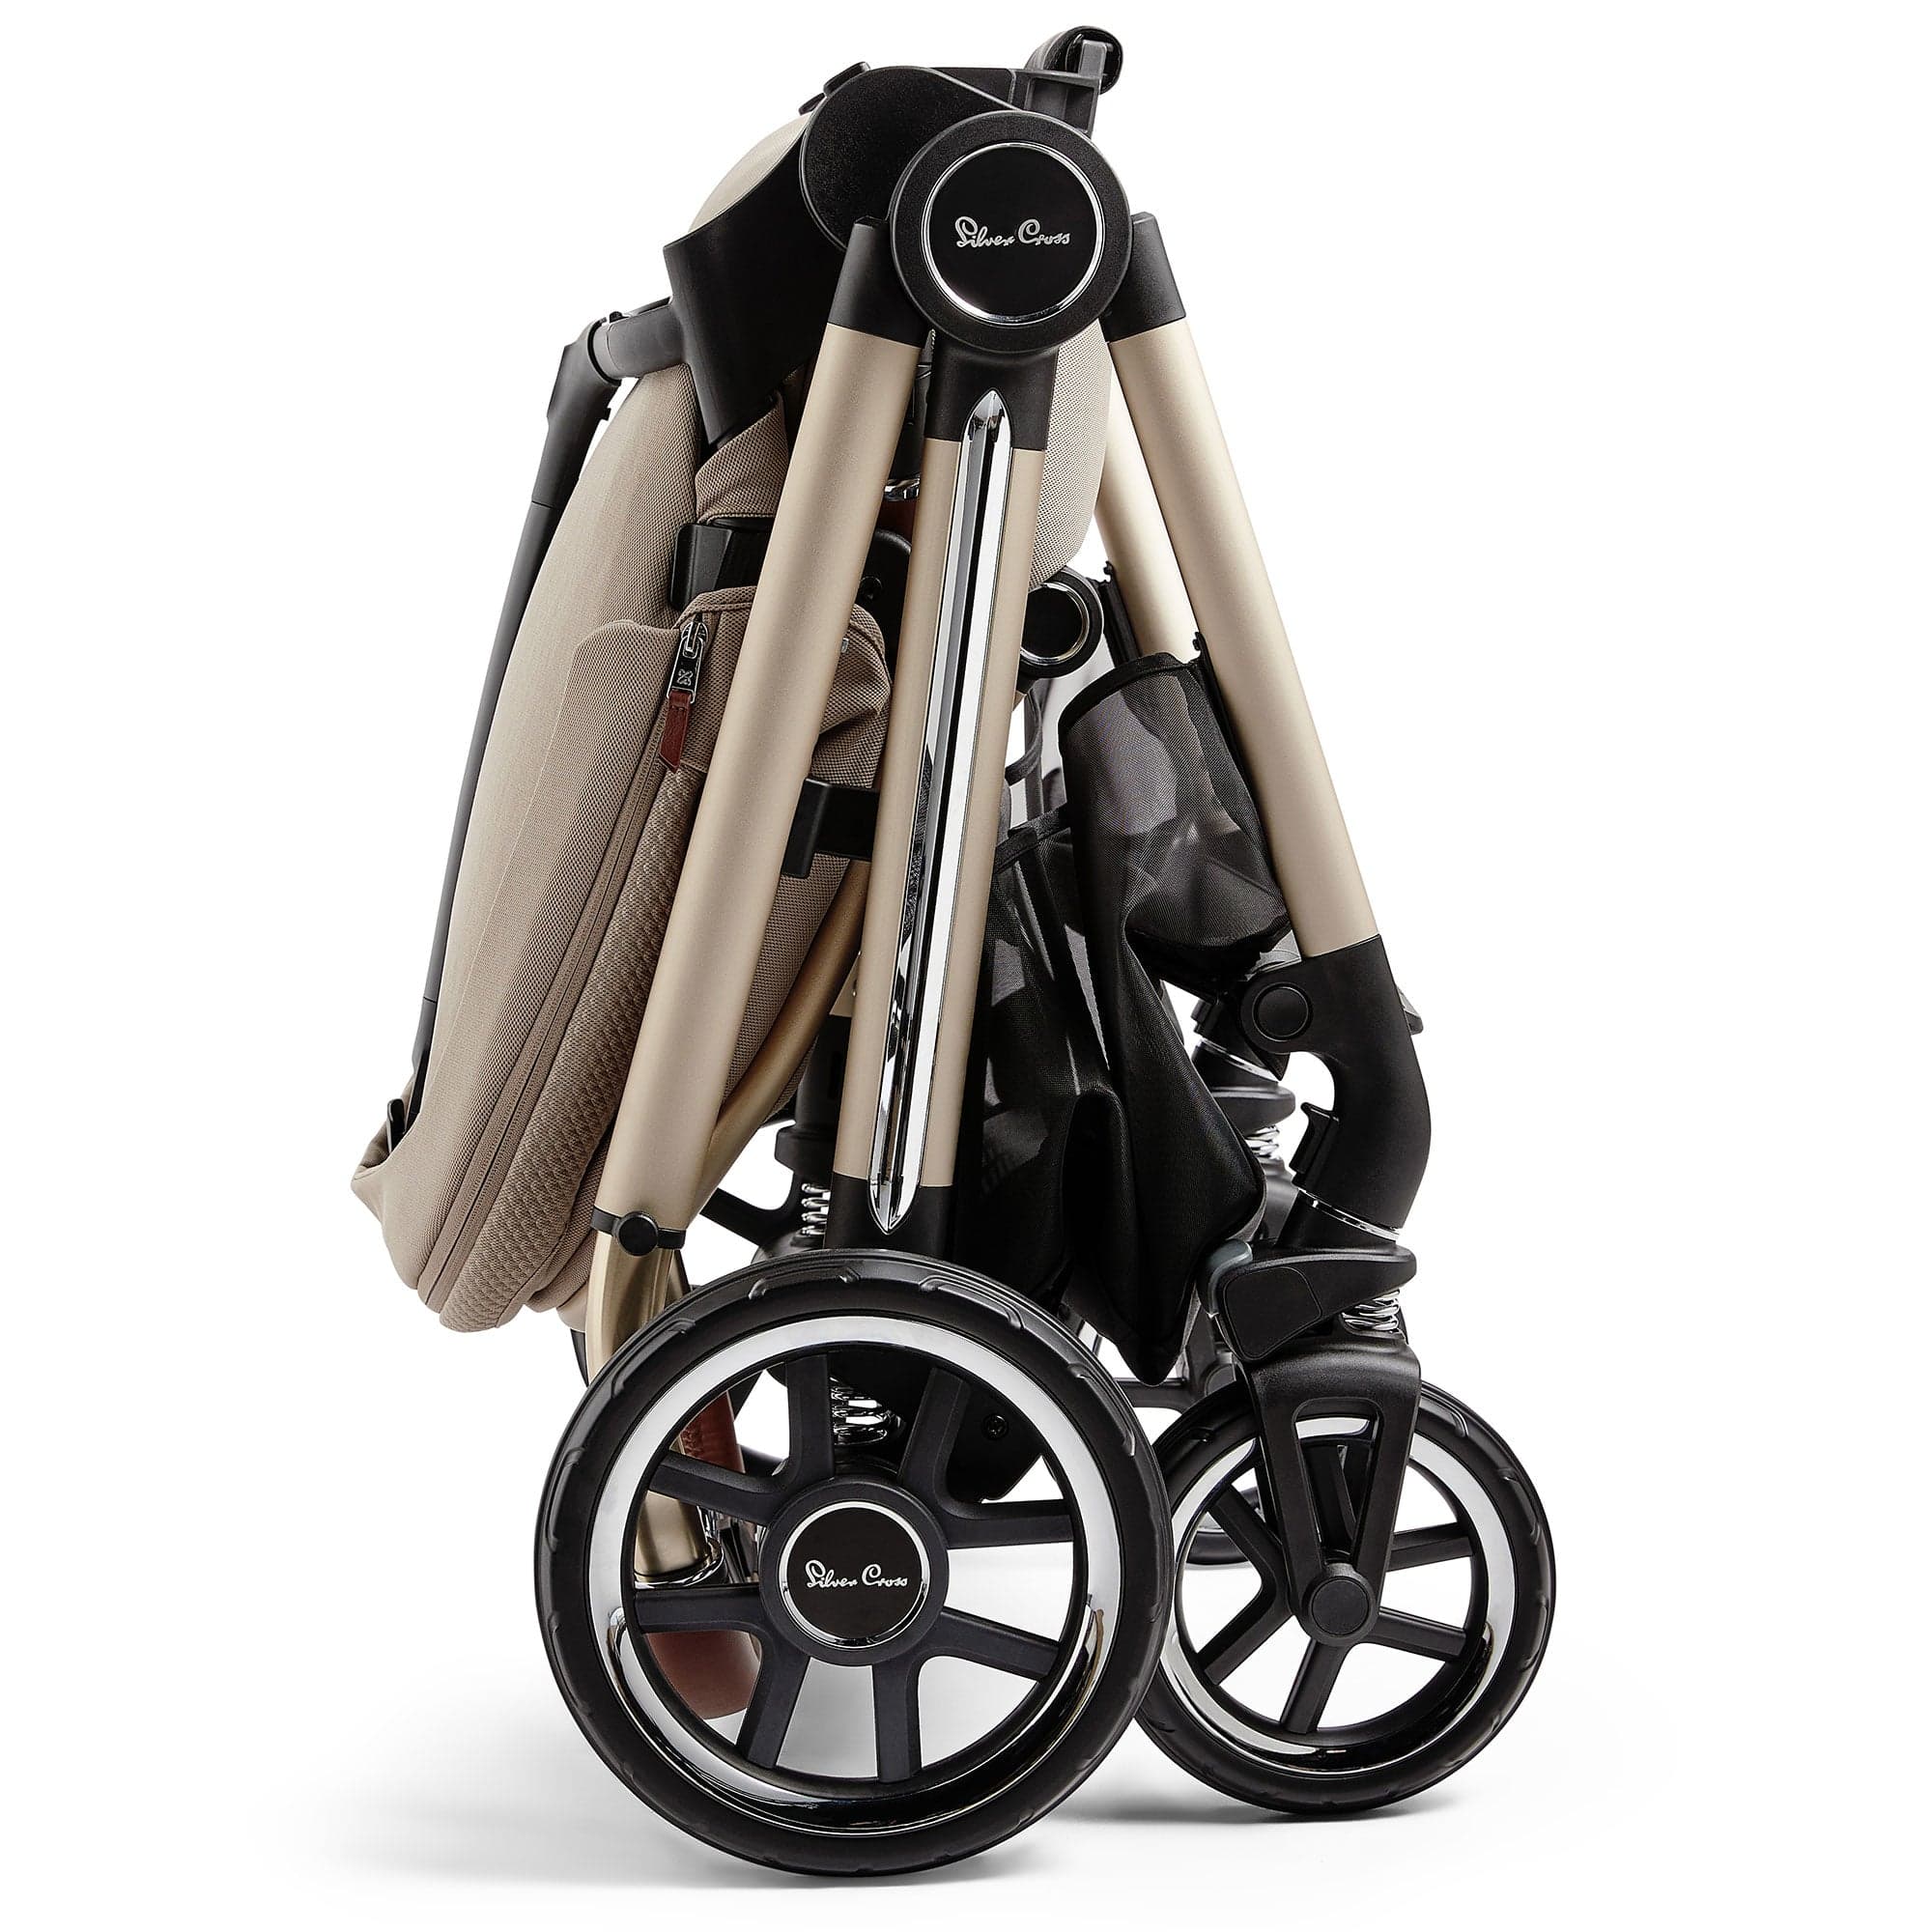 Silver Cross travel systems Silver Cross Reef + Ultimate Pack with First Bed Folding Carrycot - Stone KTRU.ST4